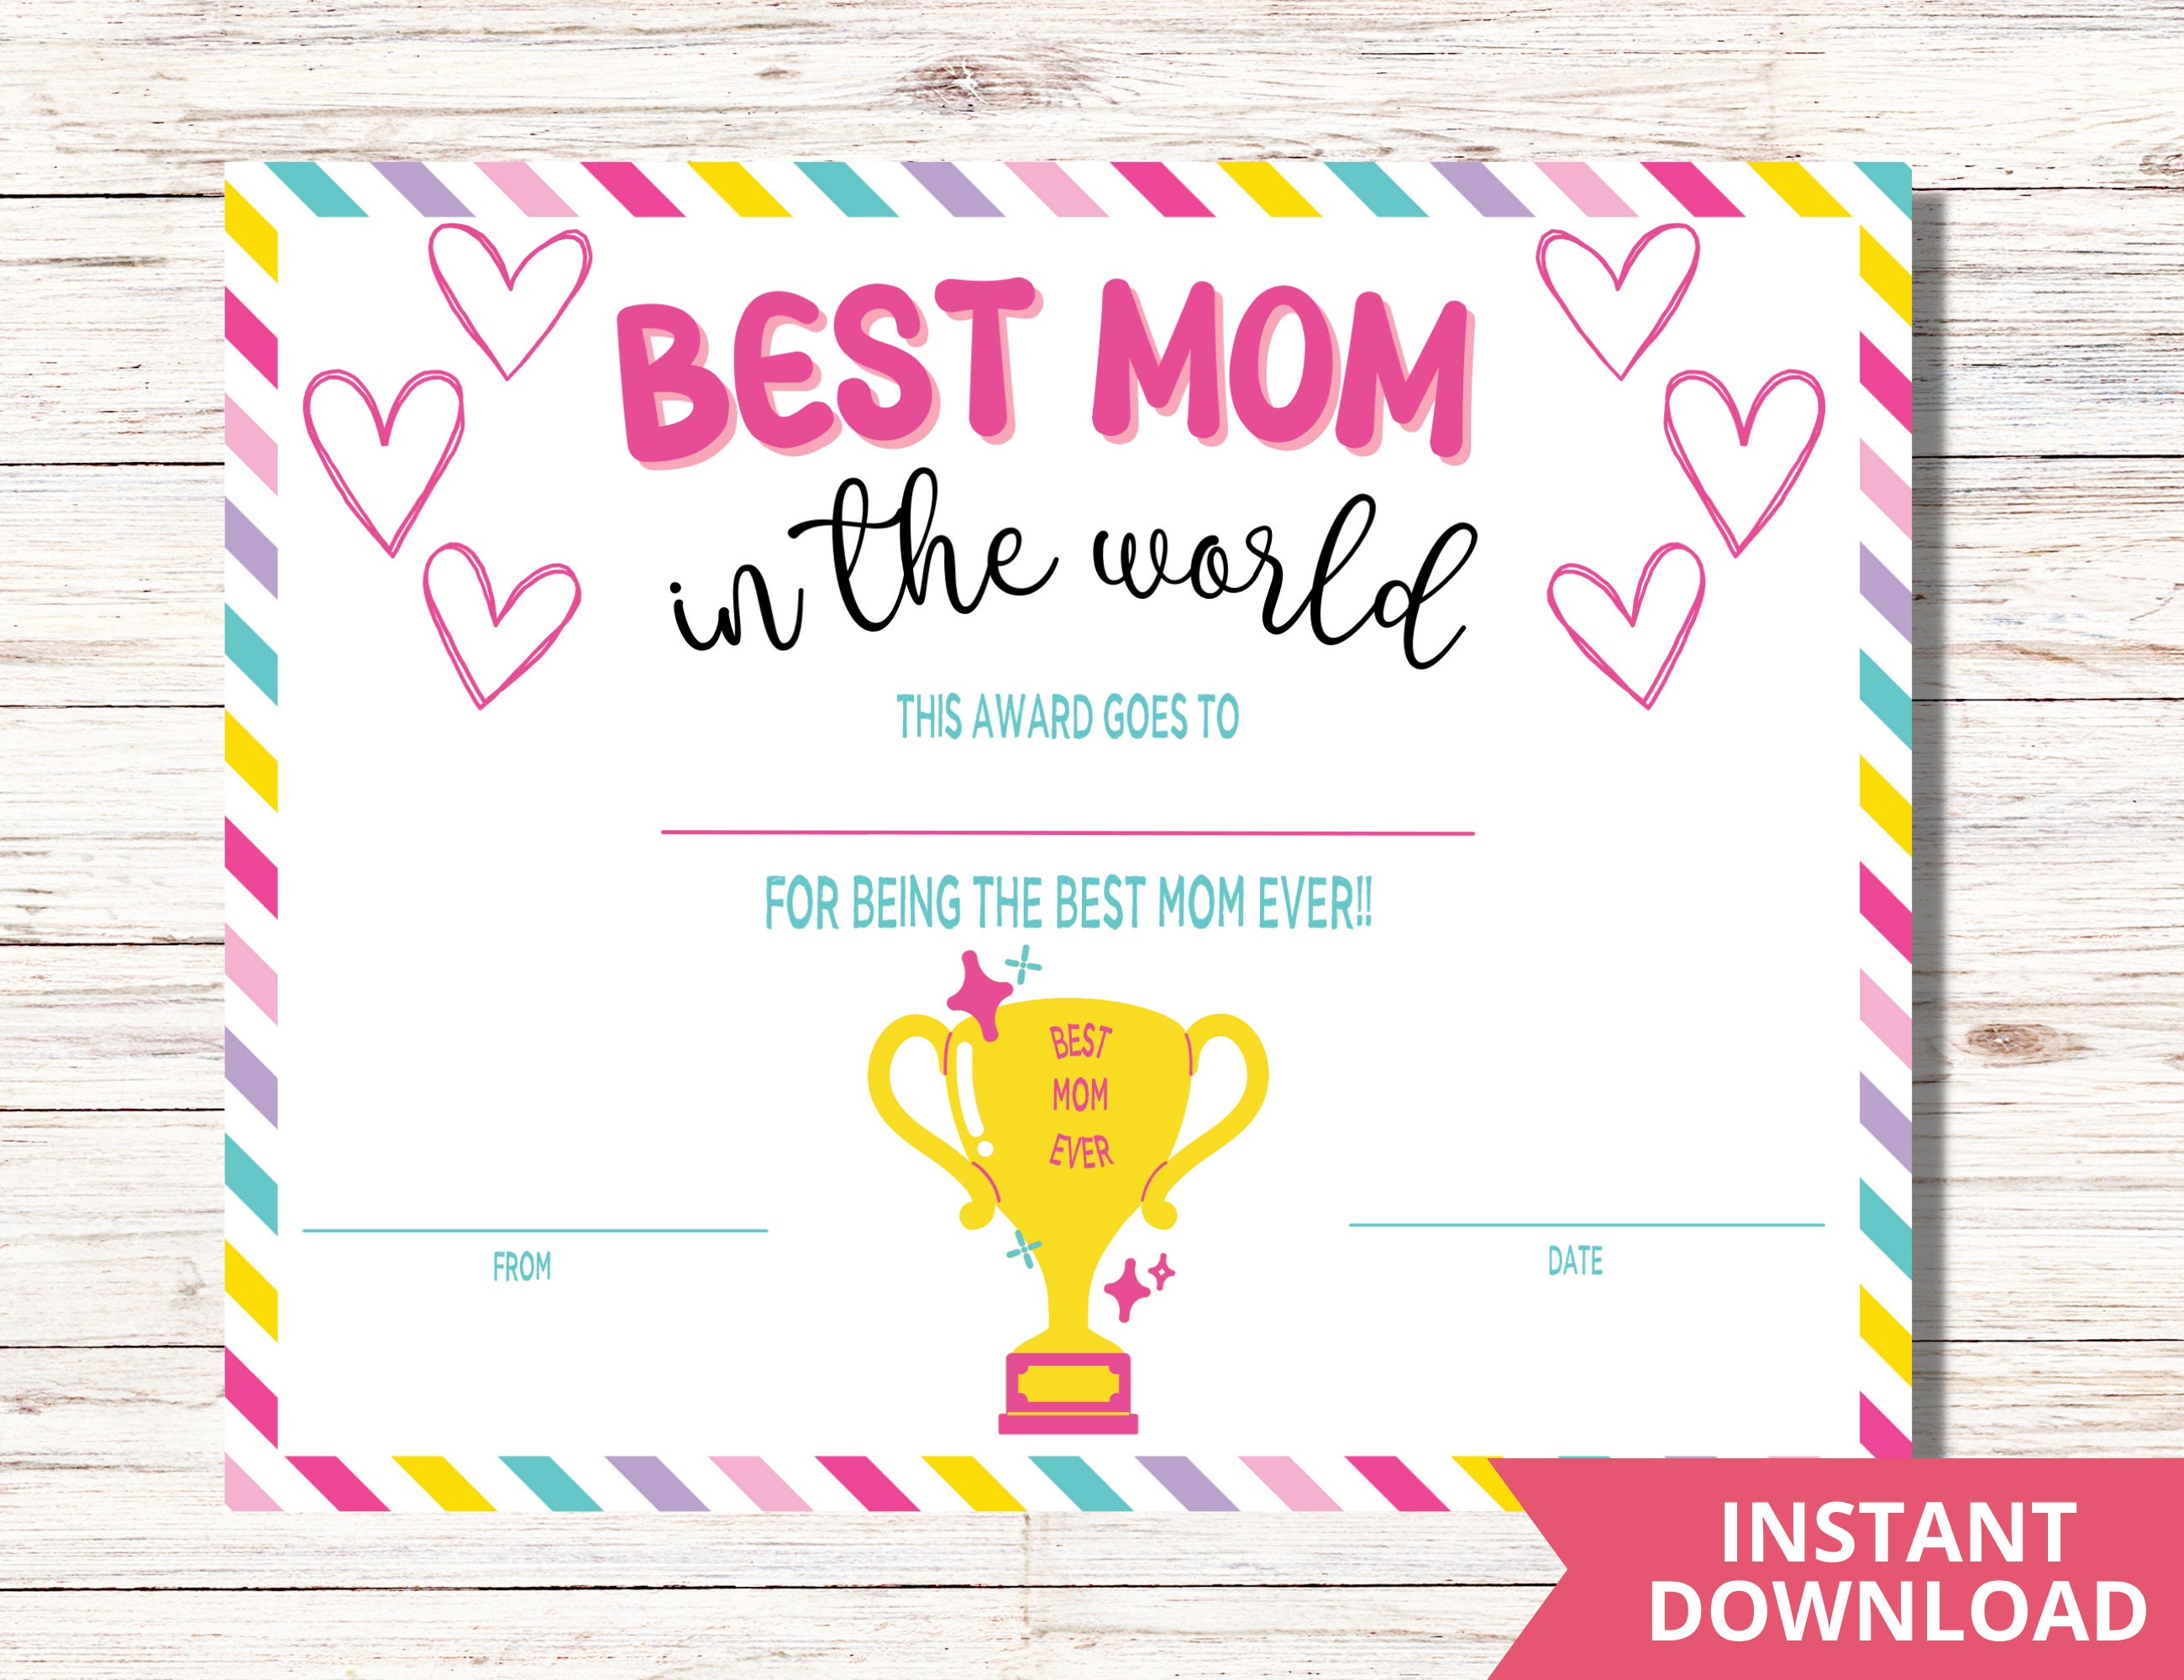 Best Mom in the World Template